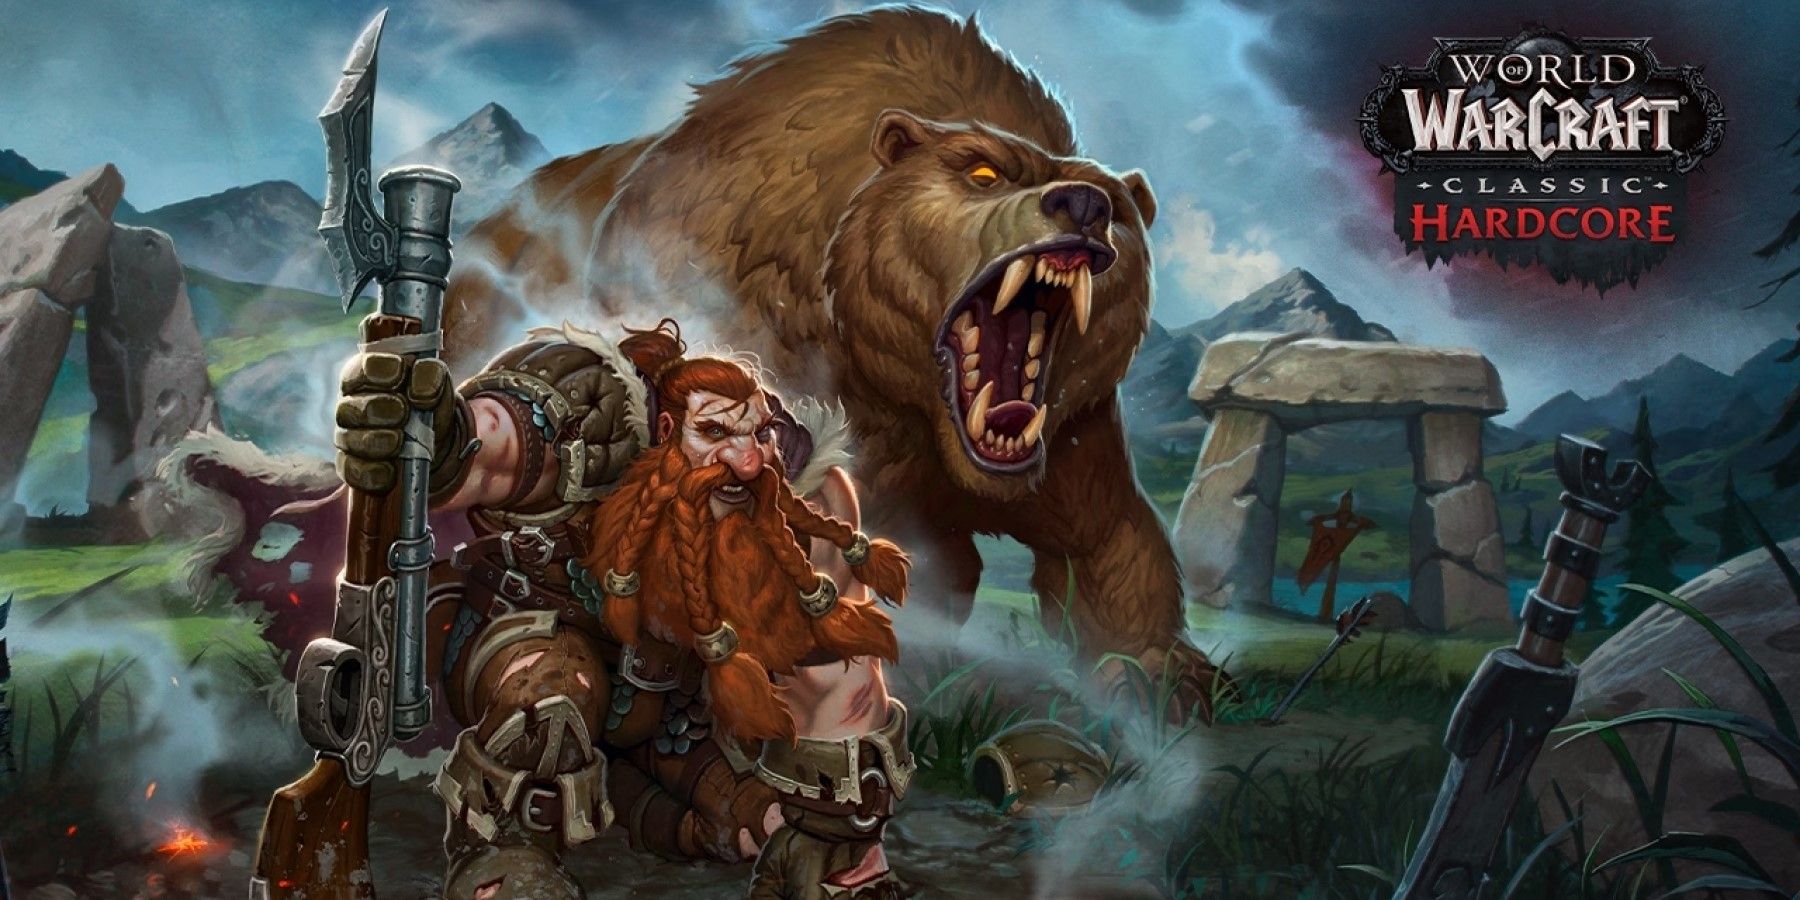 world of warcraft classic hardcore is about to get even harder